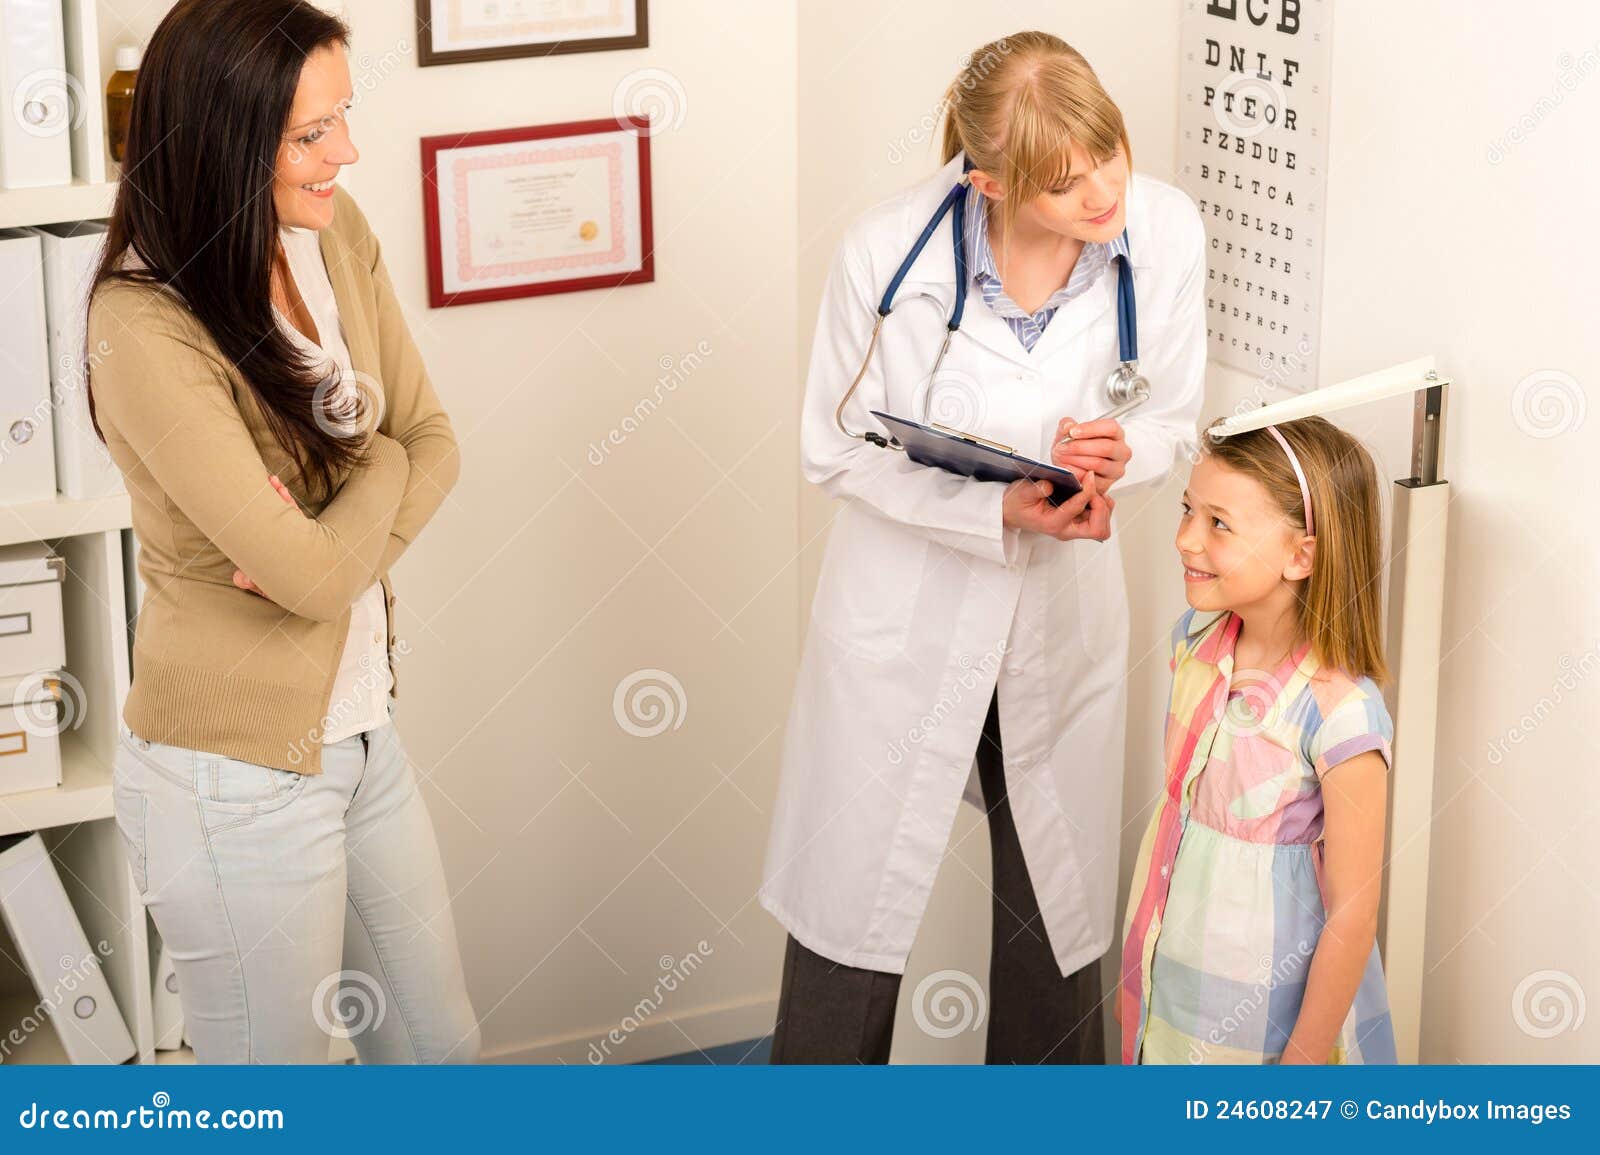 medical check-up at pediatrist girl measure height